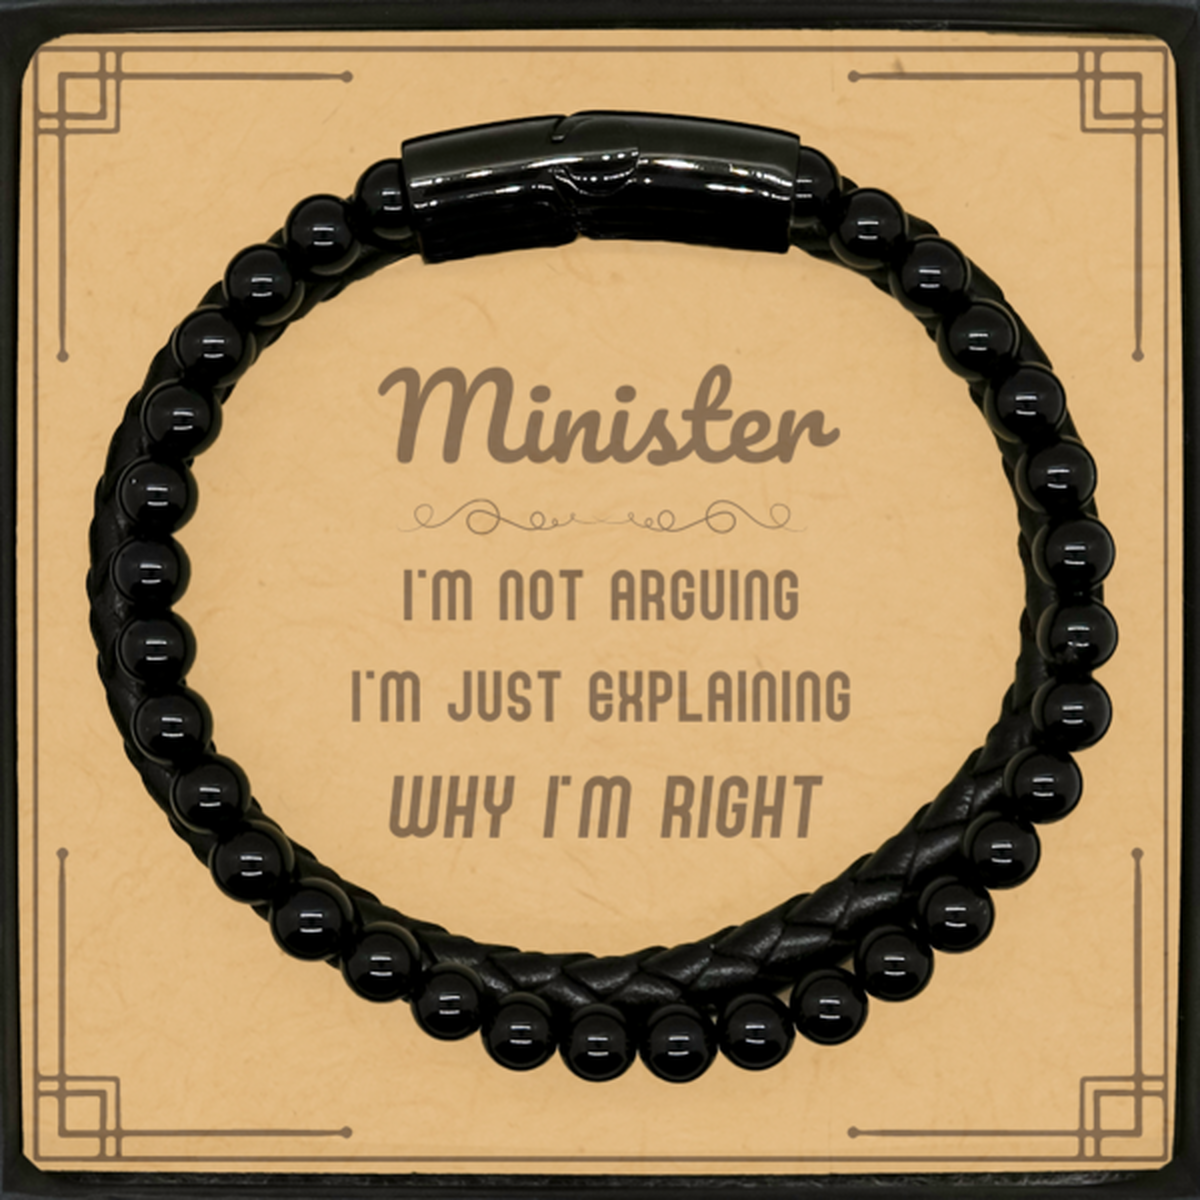 Minister I'm not Arguing. I'm Just Explaining Why I'm RIGHT Stone Leather Bracelets, Funny Saying Quote Minister Gifts For Minister Message Card Graduation Birthday Christmas Gifts for Men Women Coworker